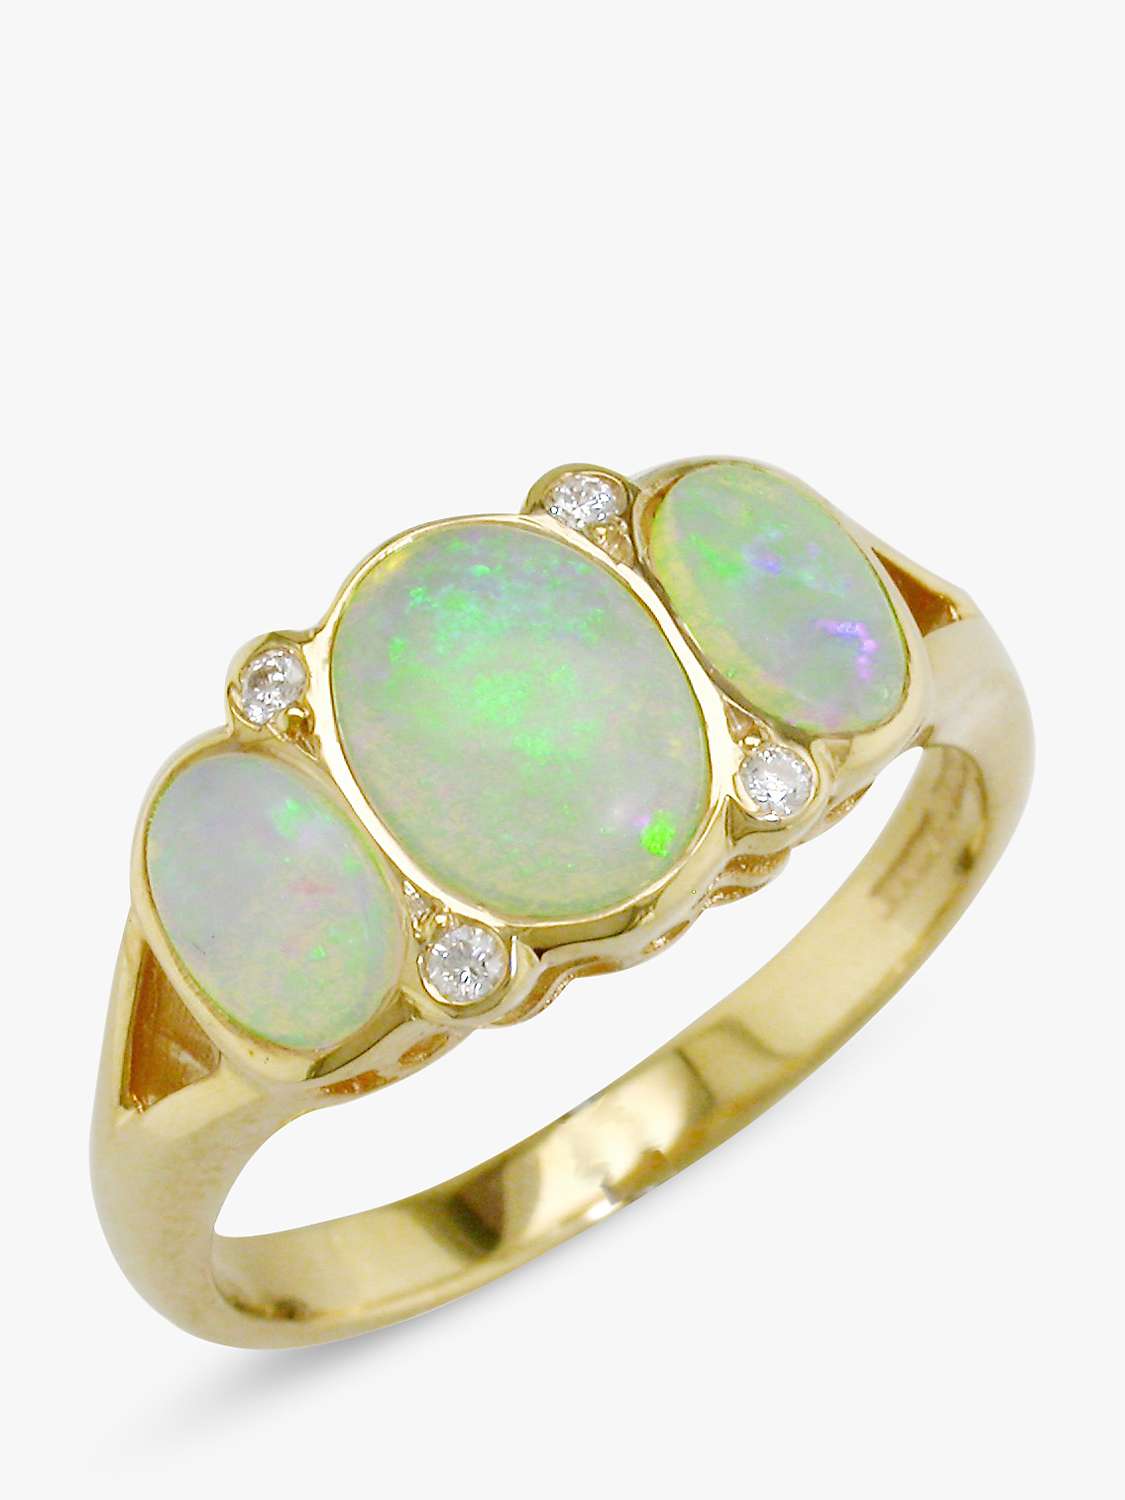 Buy E.W Adams 9ct Yellow Gold Opal and Diamond Cocktail Ring Online at johnlewis.com